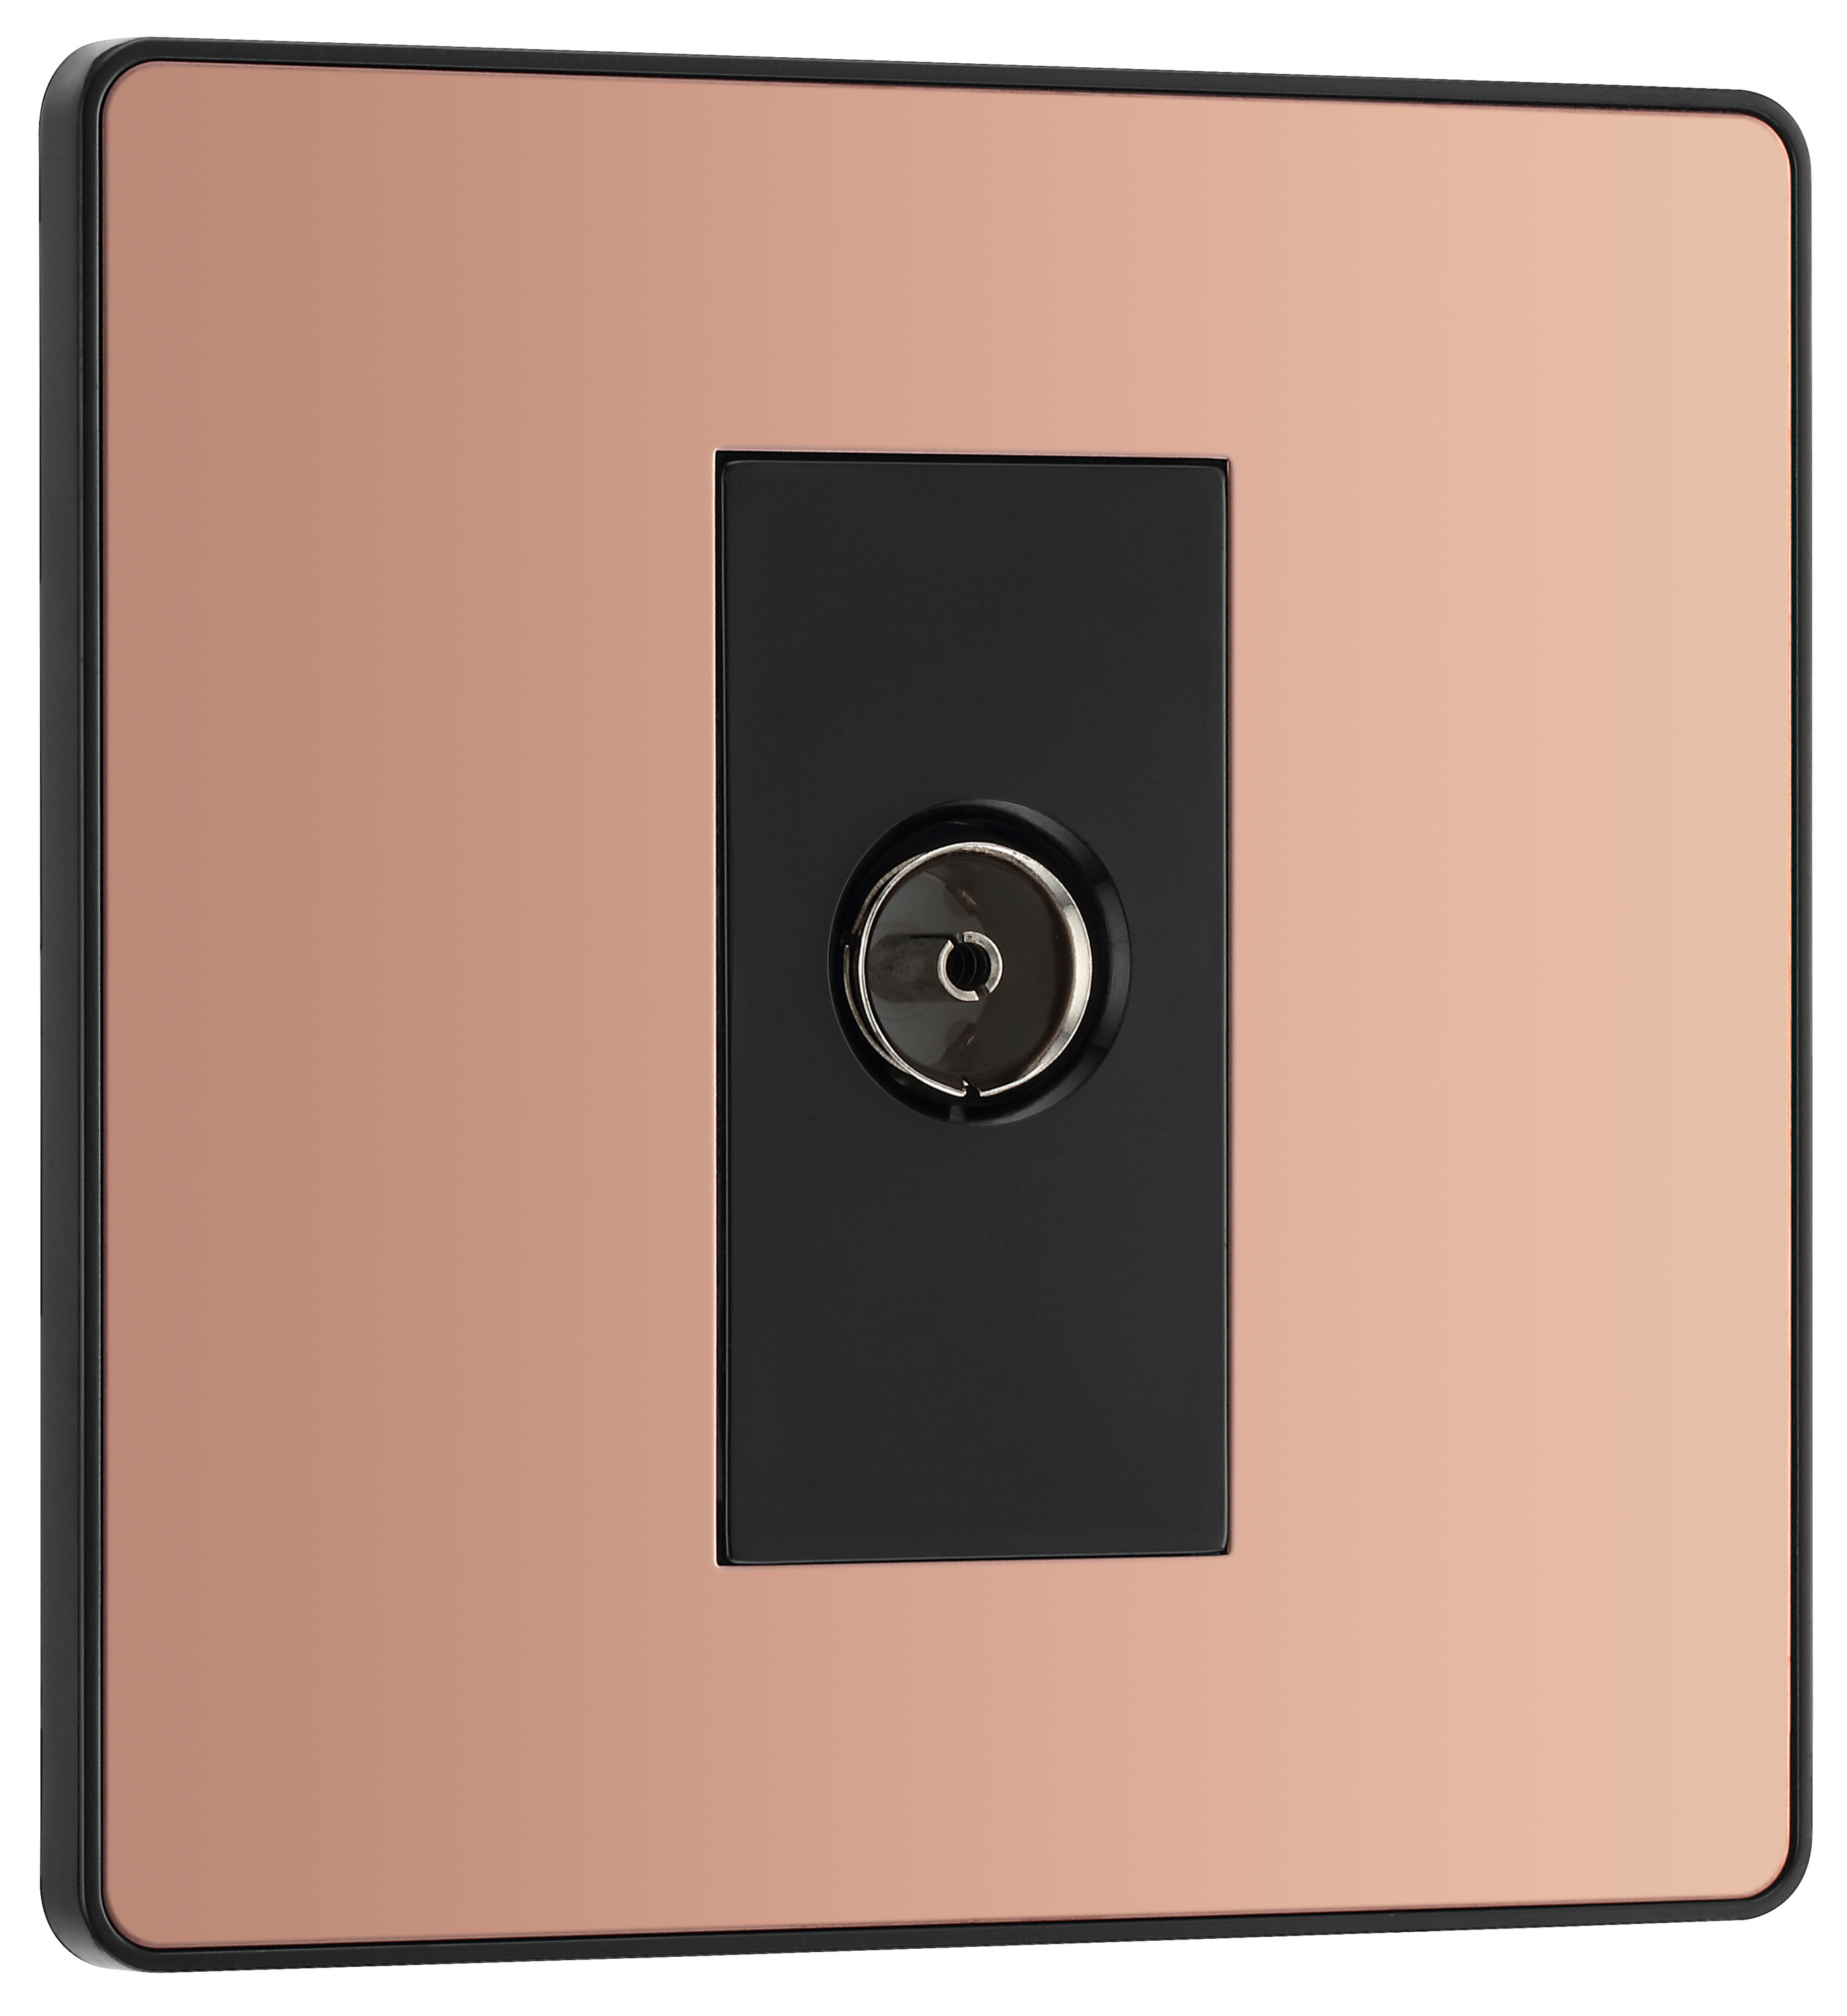 BG Evolve Polished Copper Single Socket for TV or FM Co-Axial Aerial Connection